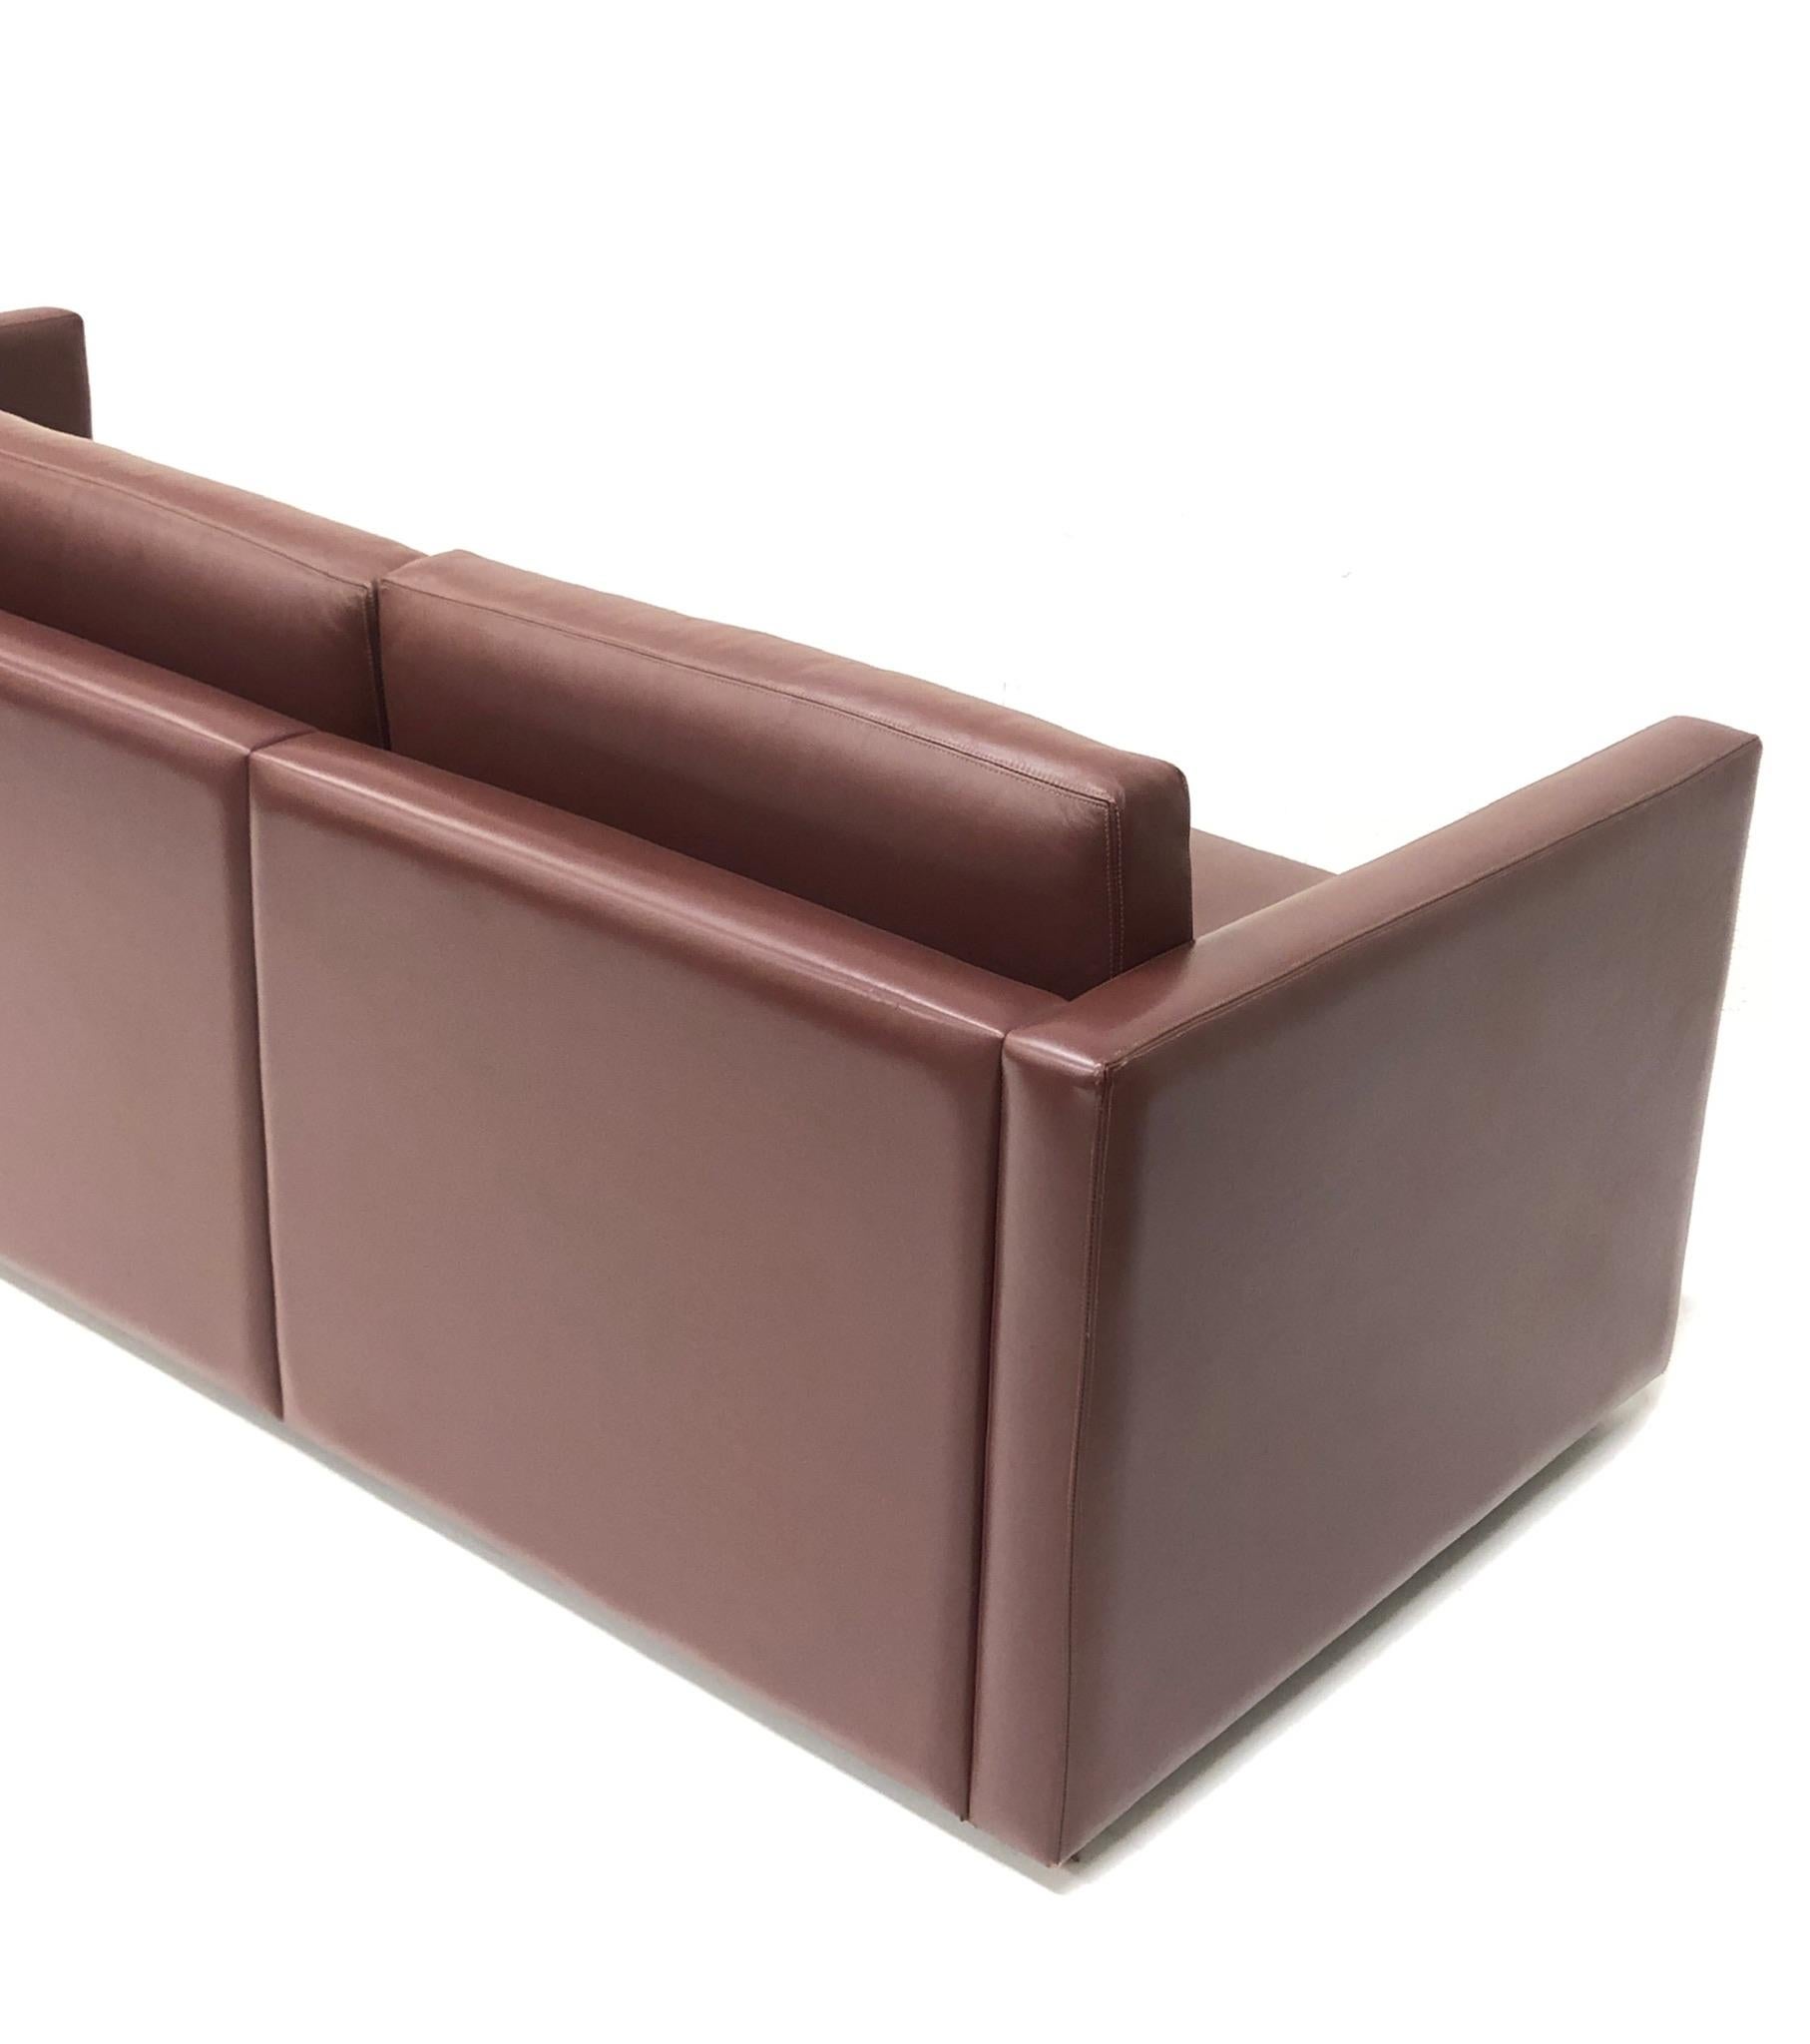 Modern Burgundy Leather Sofa by Charles Pfister for Knoll